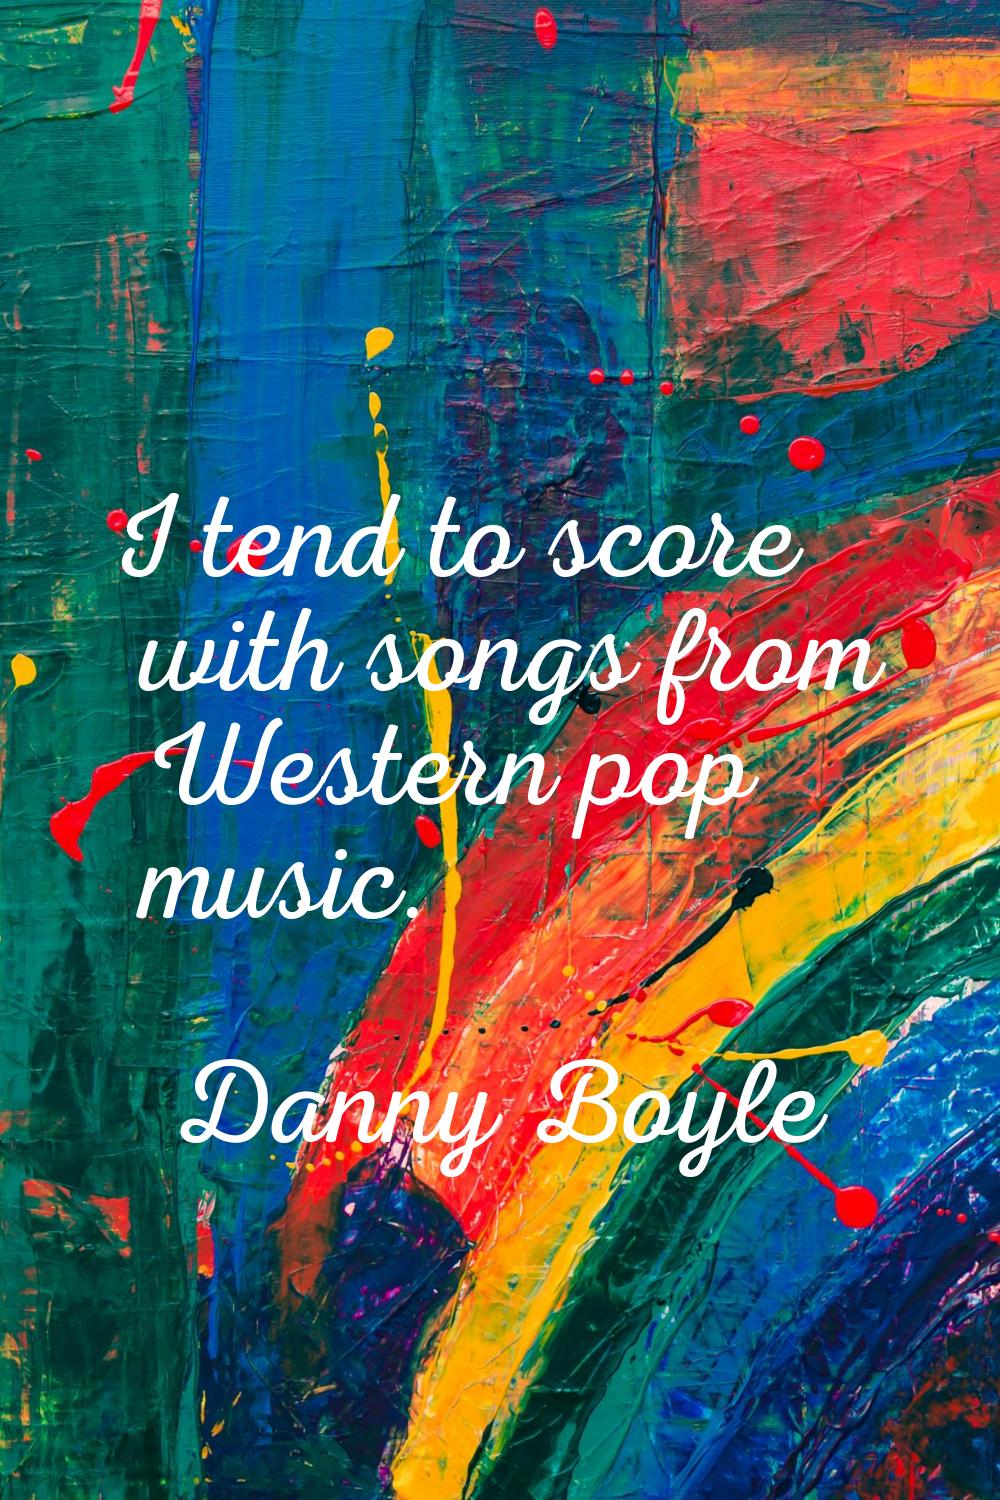 I tend to score with songs from Western pop music.